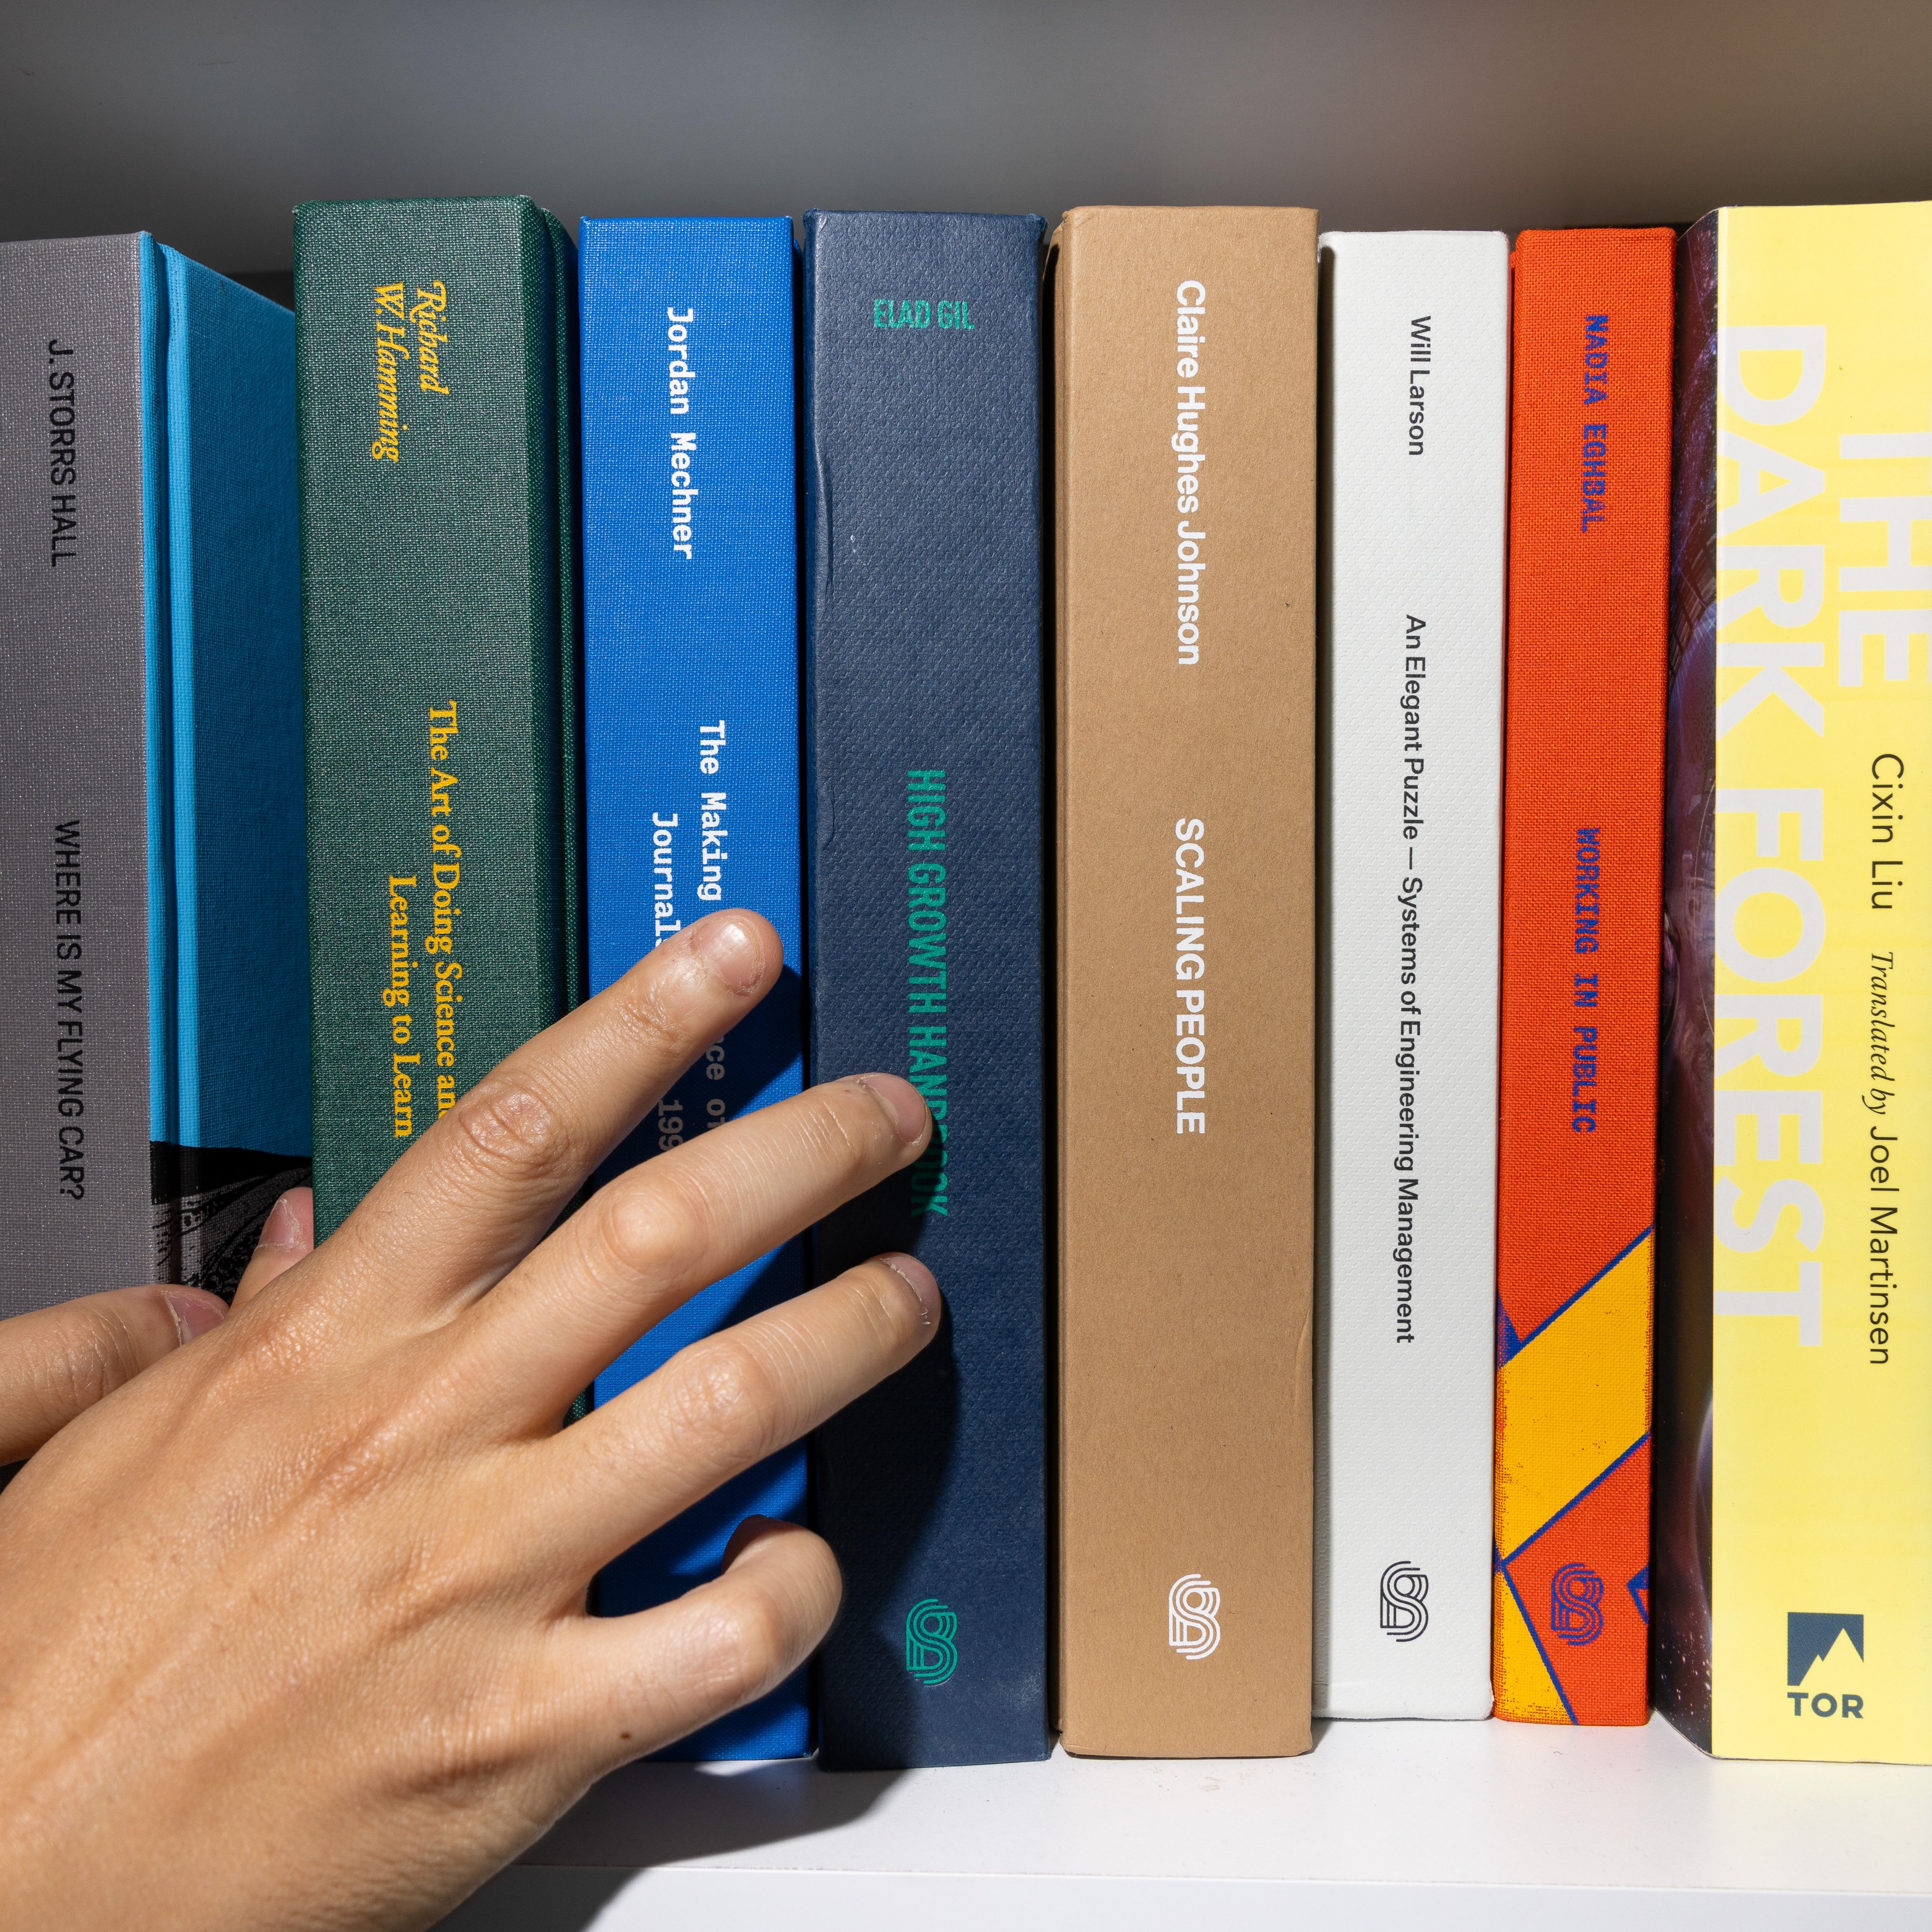 A hand is selecting a book from a neatly arranged bookshelf that features titles such as &quot;Scaling People,&quot; &quot;The Dark Forest,&quot; and &quot;High Growth Handbook.&quot;